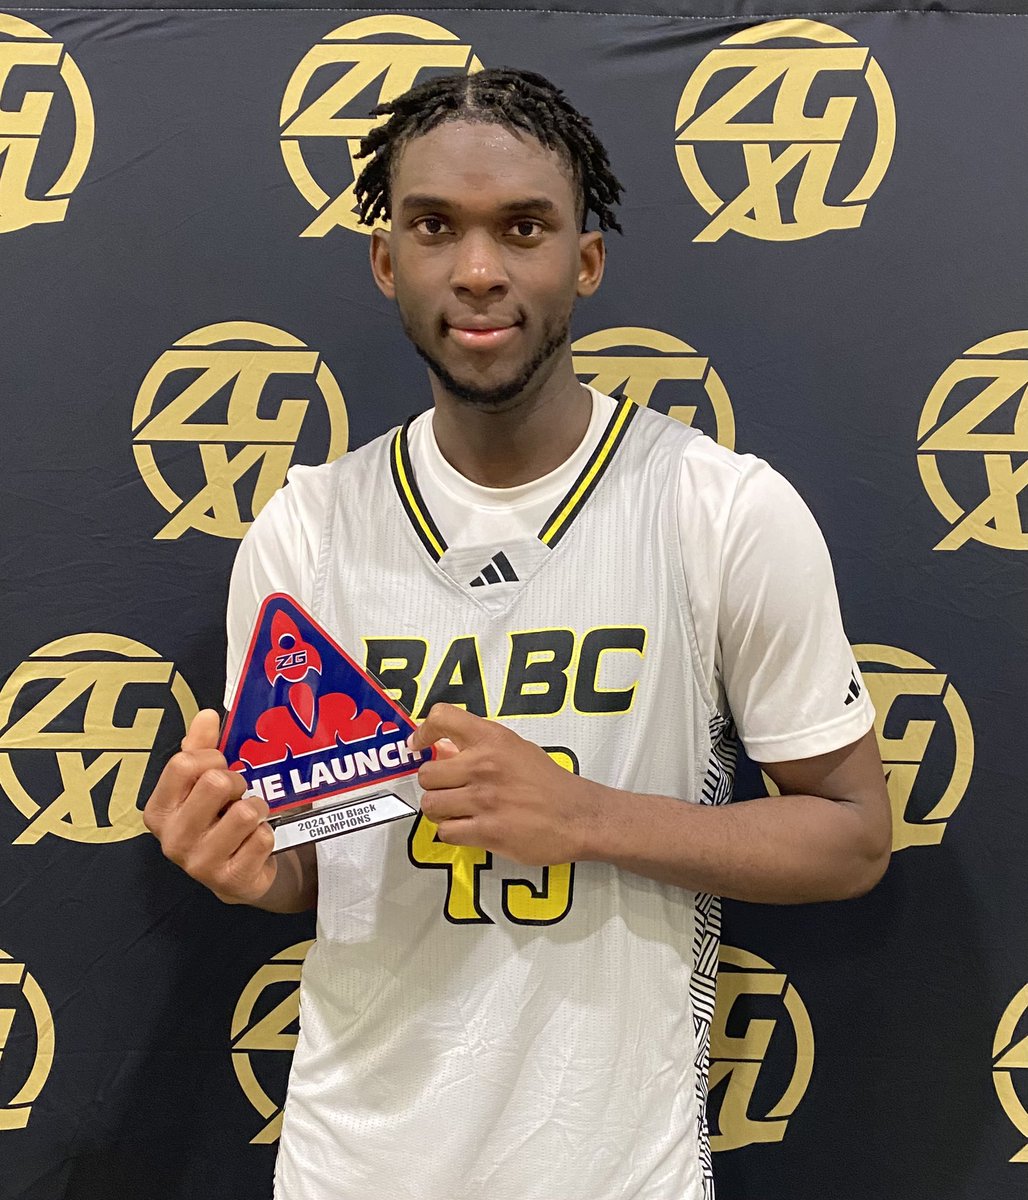 Providence-commit Oswin Erhunmwunse helped power @thebabc to a title here at the launch. Erhunmwunse’s defensive abilities have earned him national spotlight, and his blocking skills were on full display today. He made highlight-reel pins on the backboard and a ton of finishes…